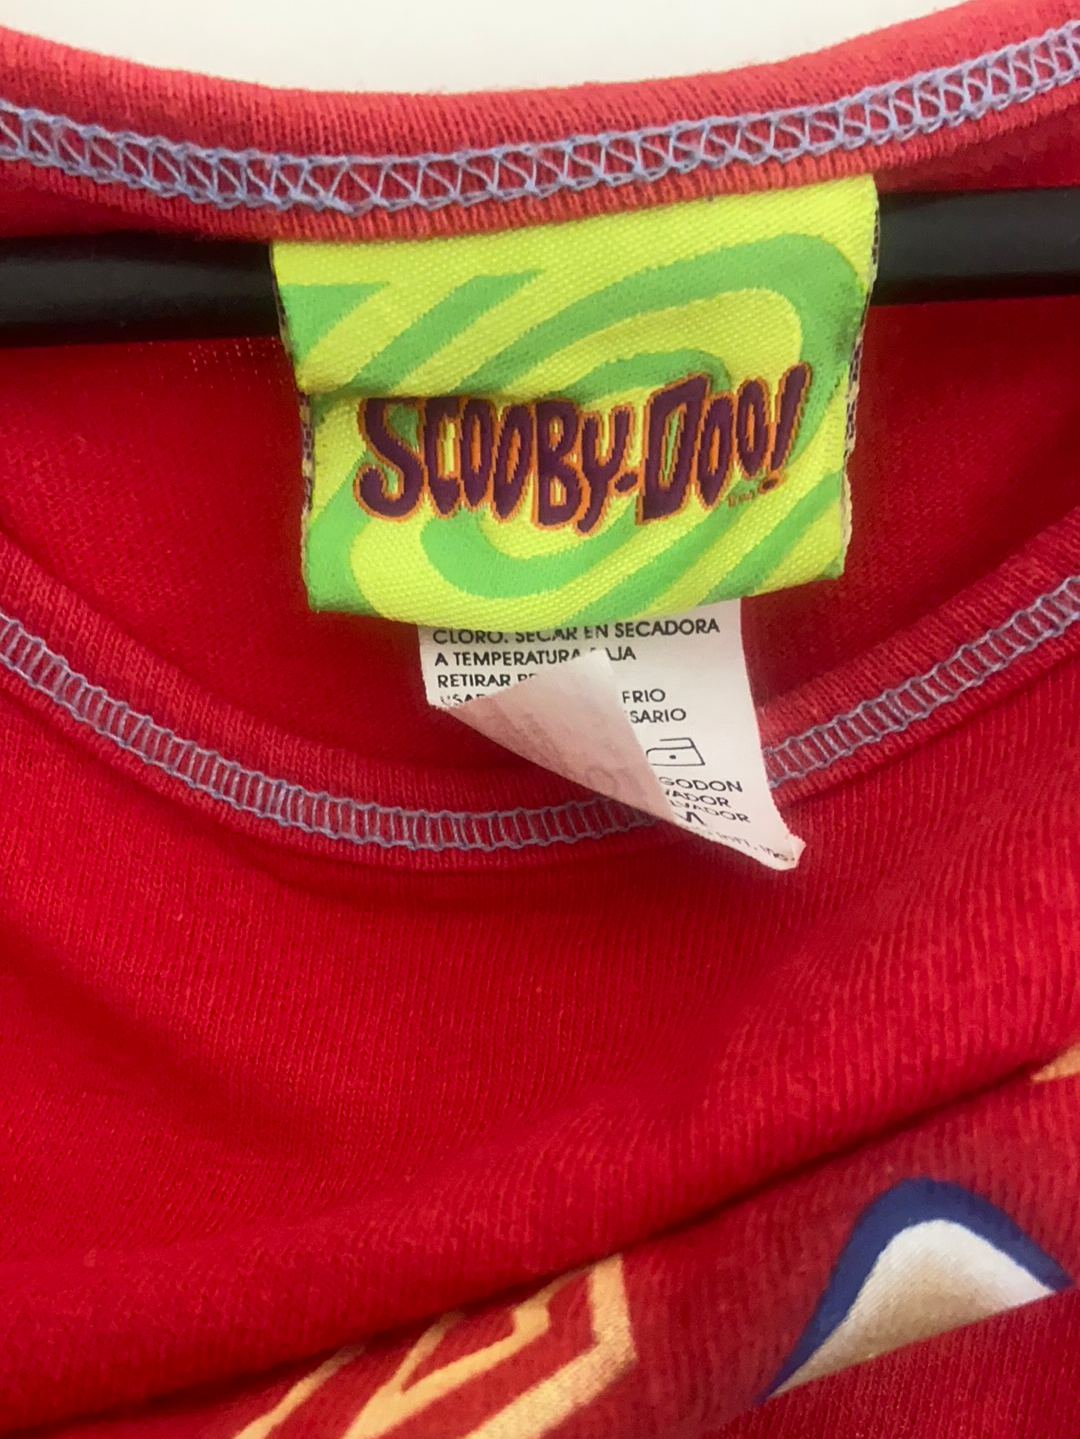 Scooby Doo Tee - One Size fits most